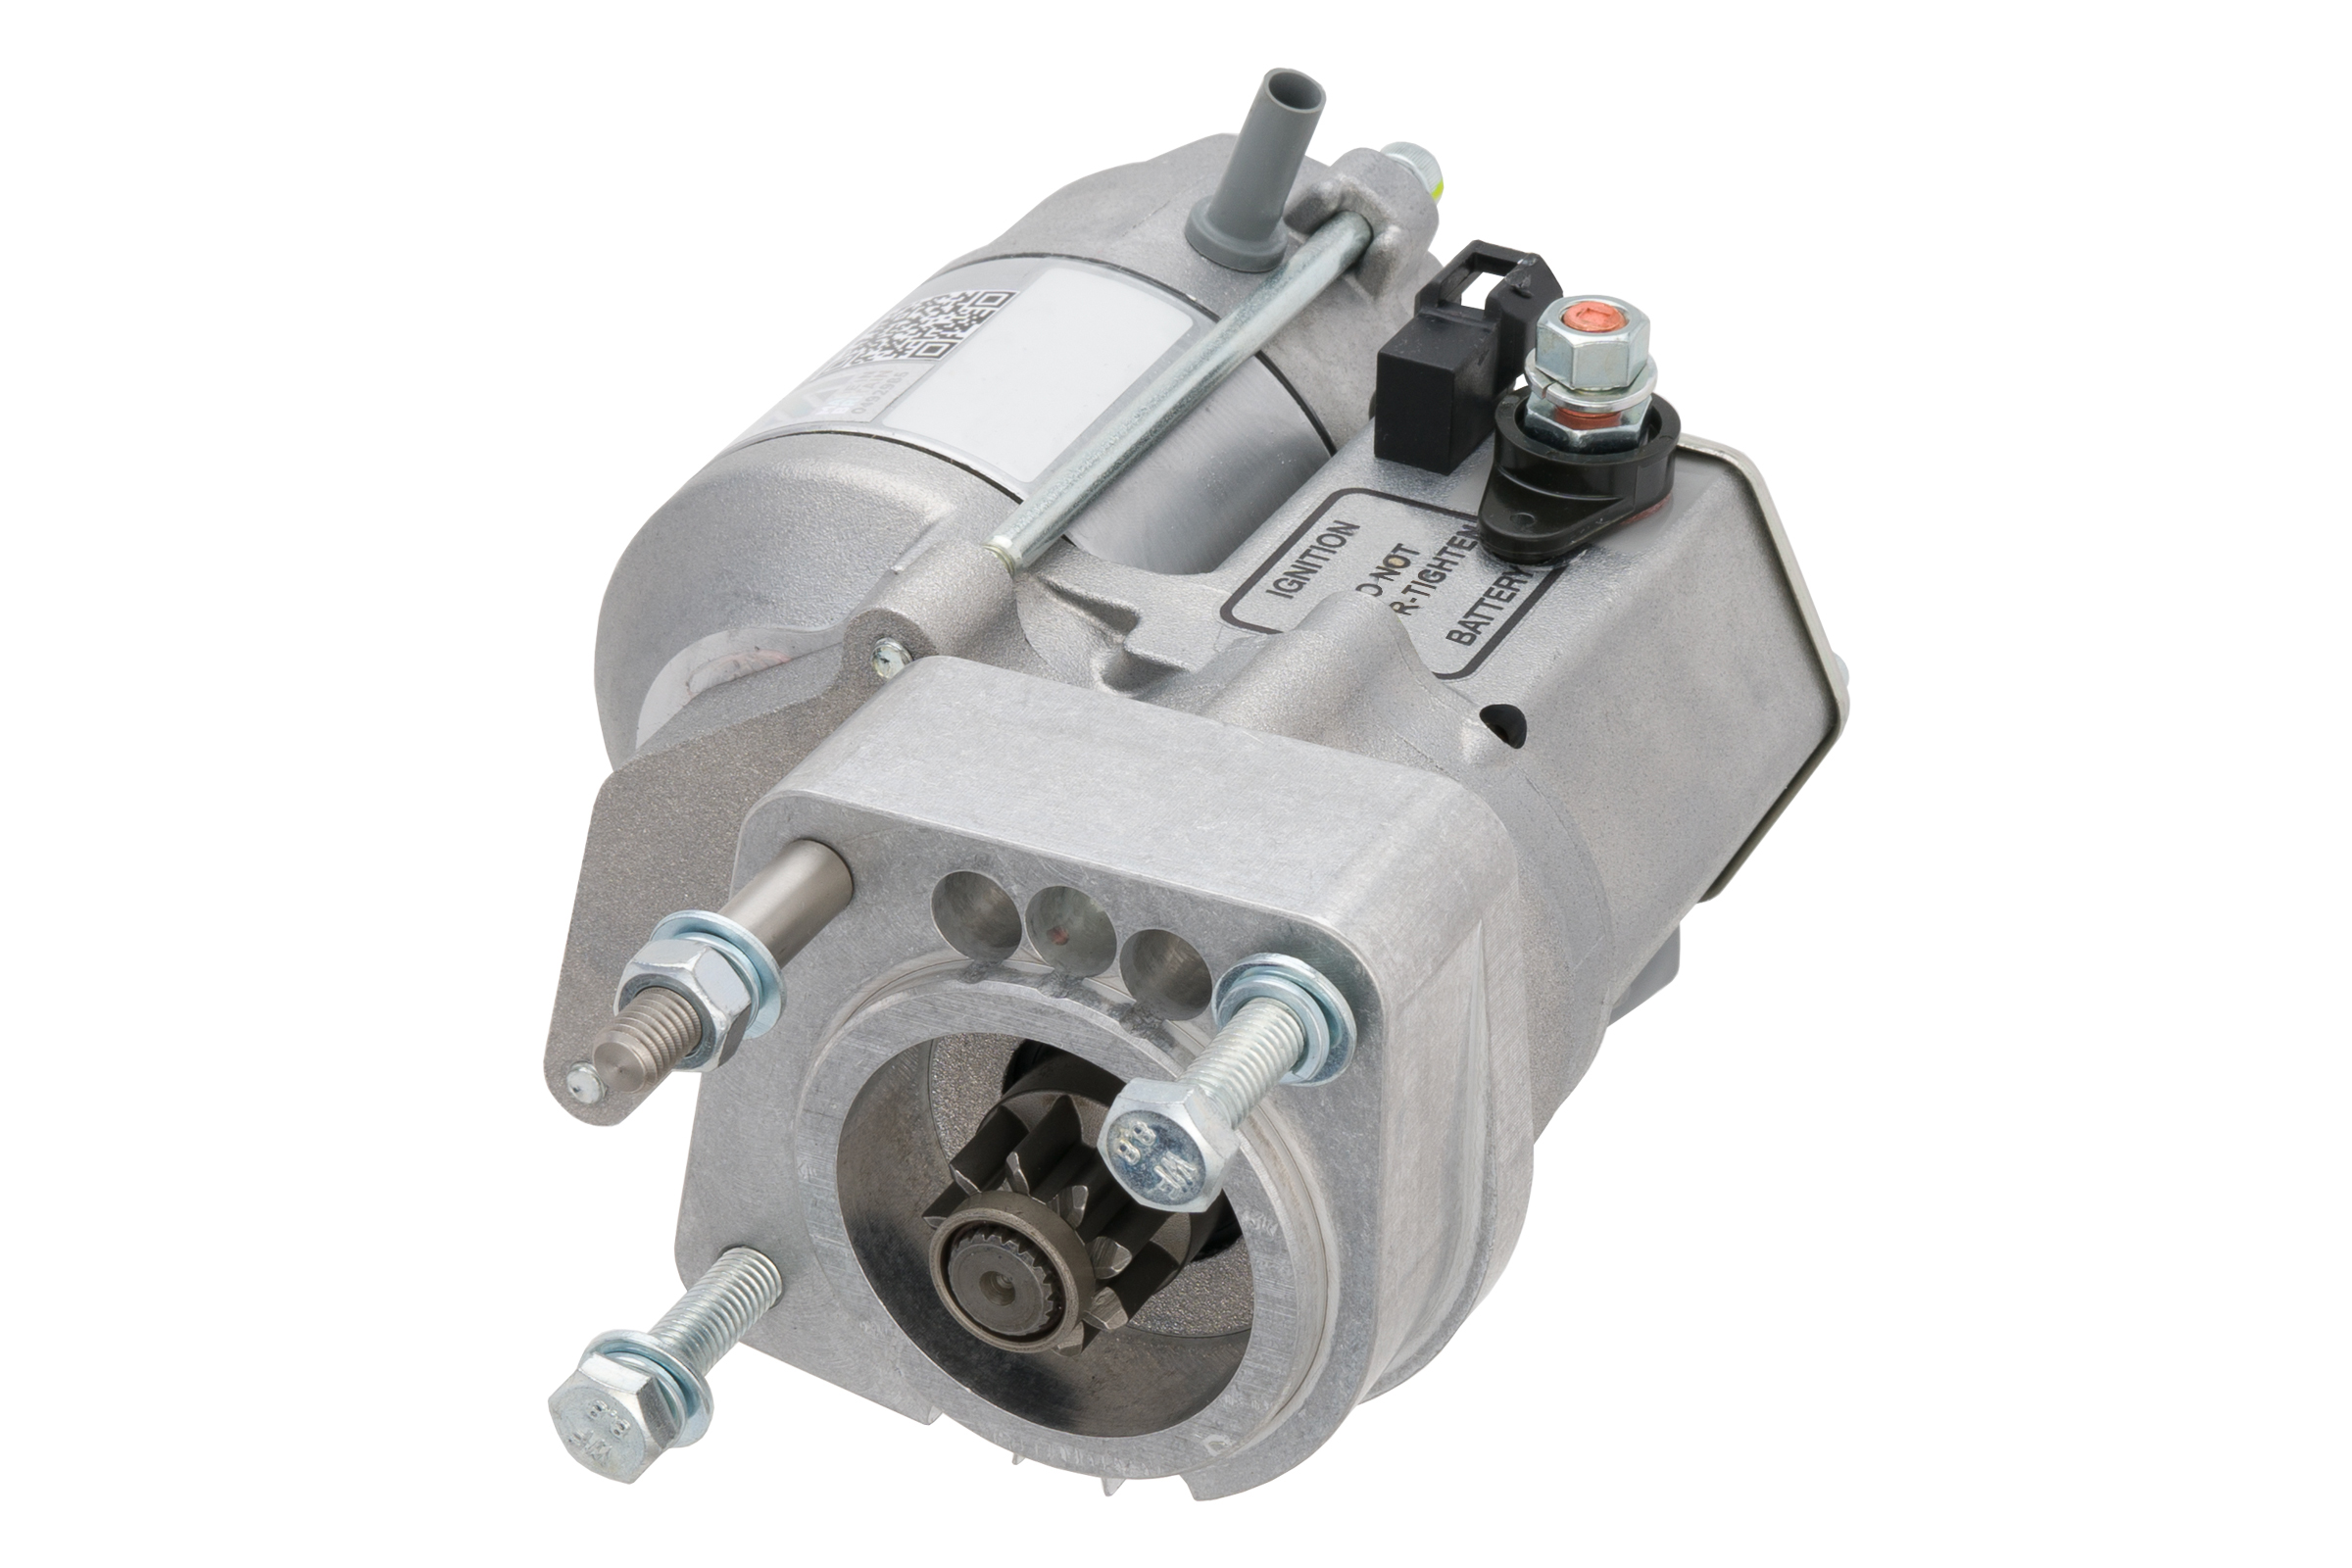 9 Tooth Race Gear Reduction Starter Motor